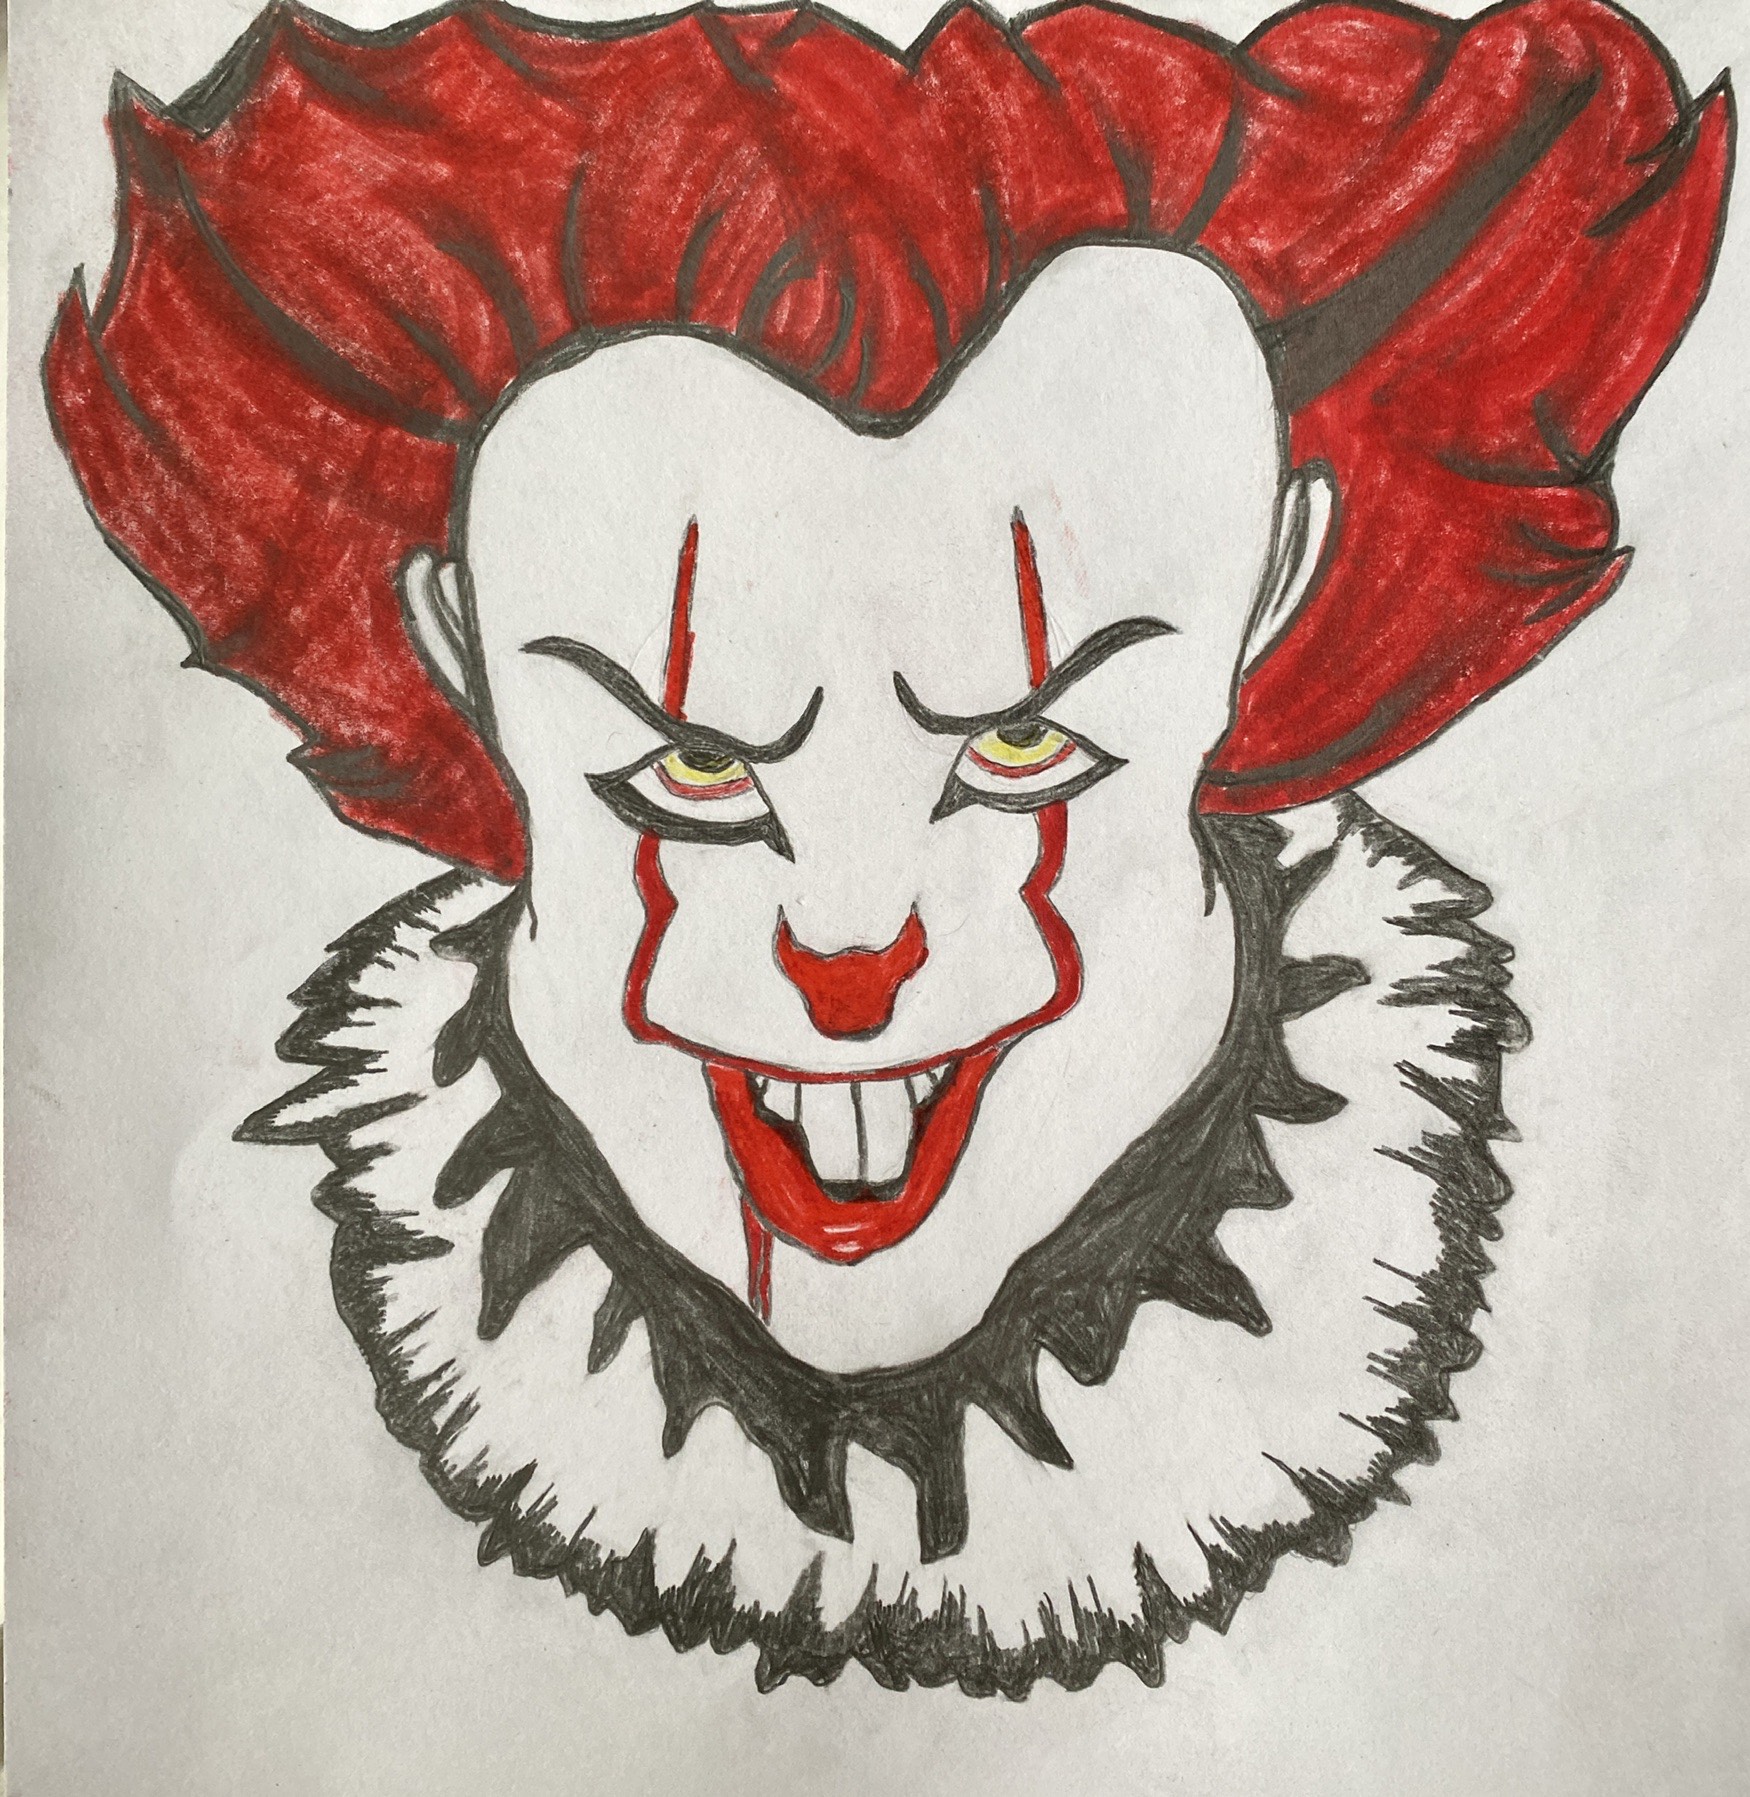 Stephen King's IT Trivia Quiz: We All Float Down Here!